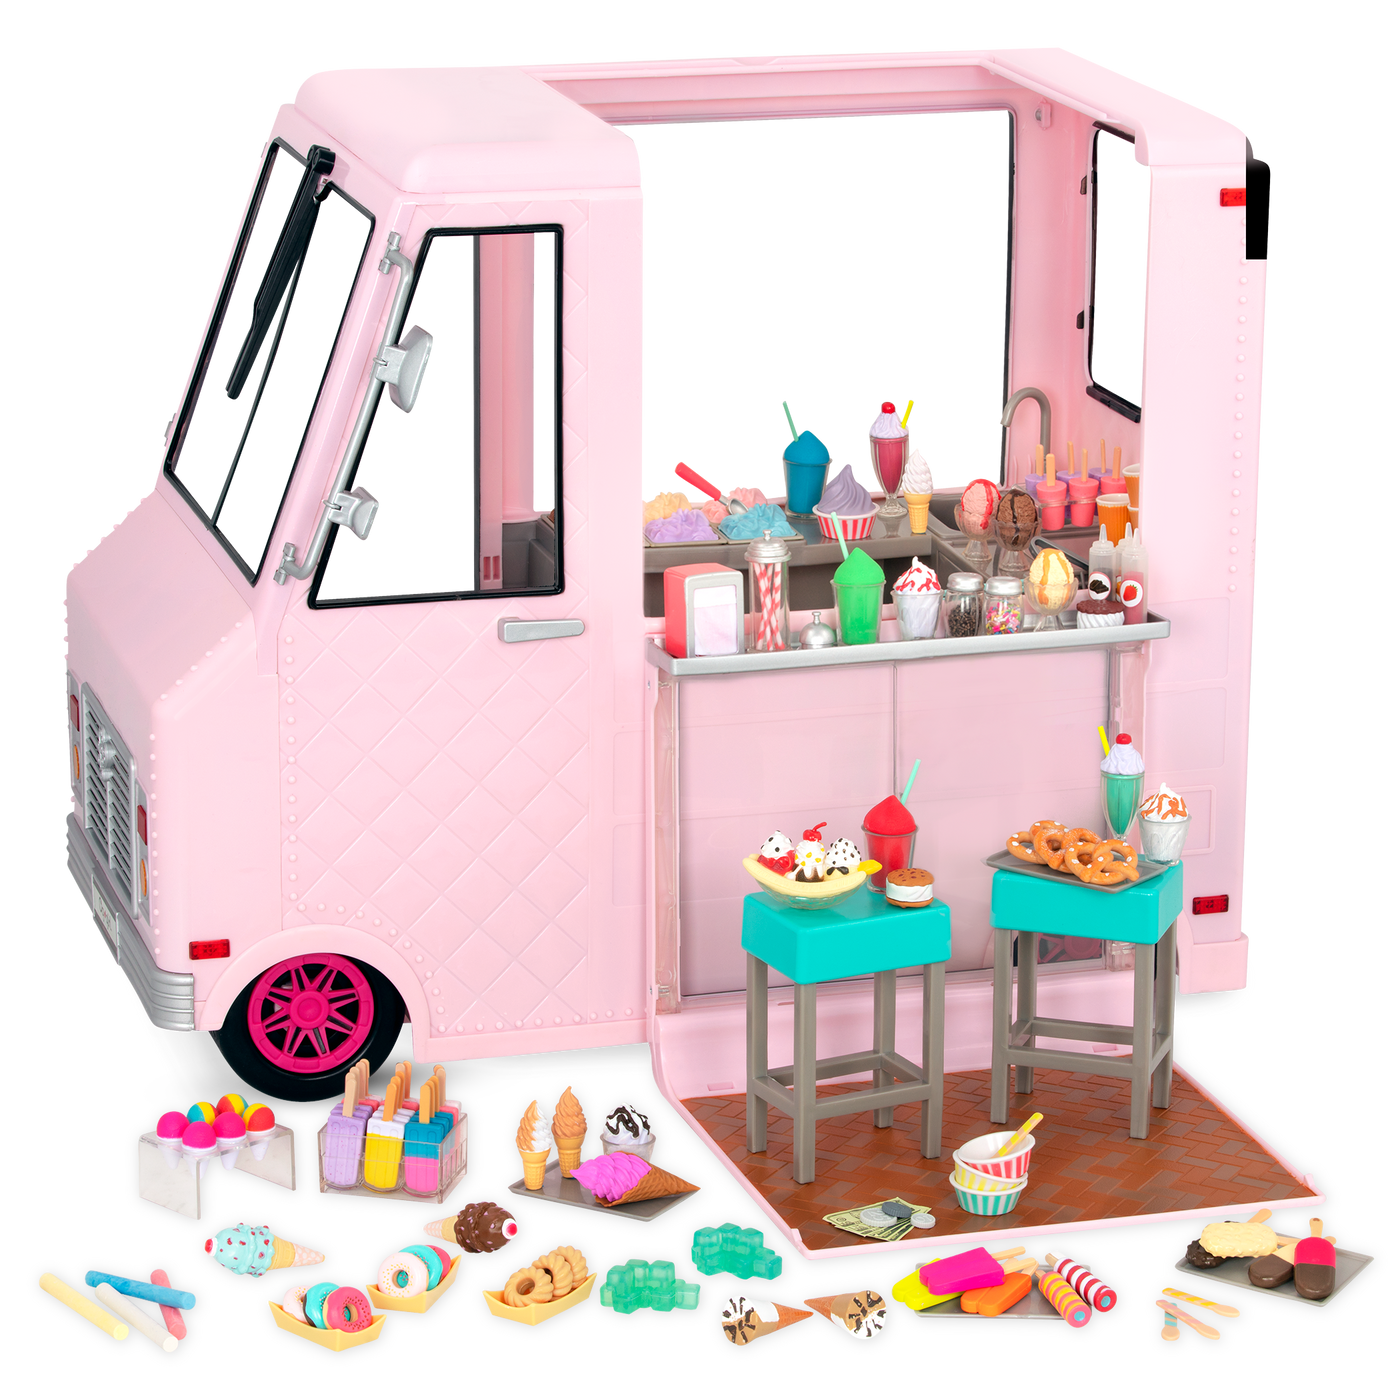 18-inch doll driving toy ice cream truck